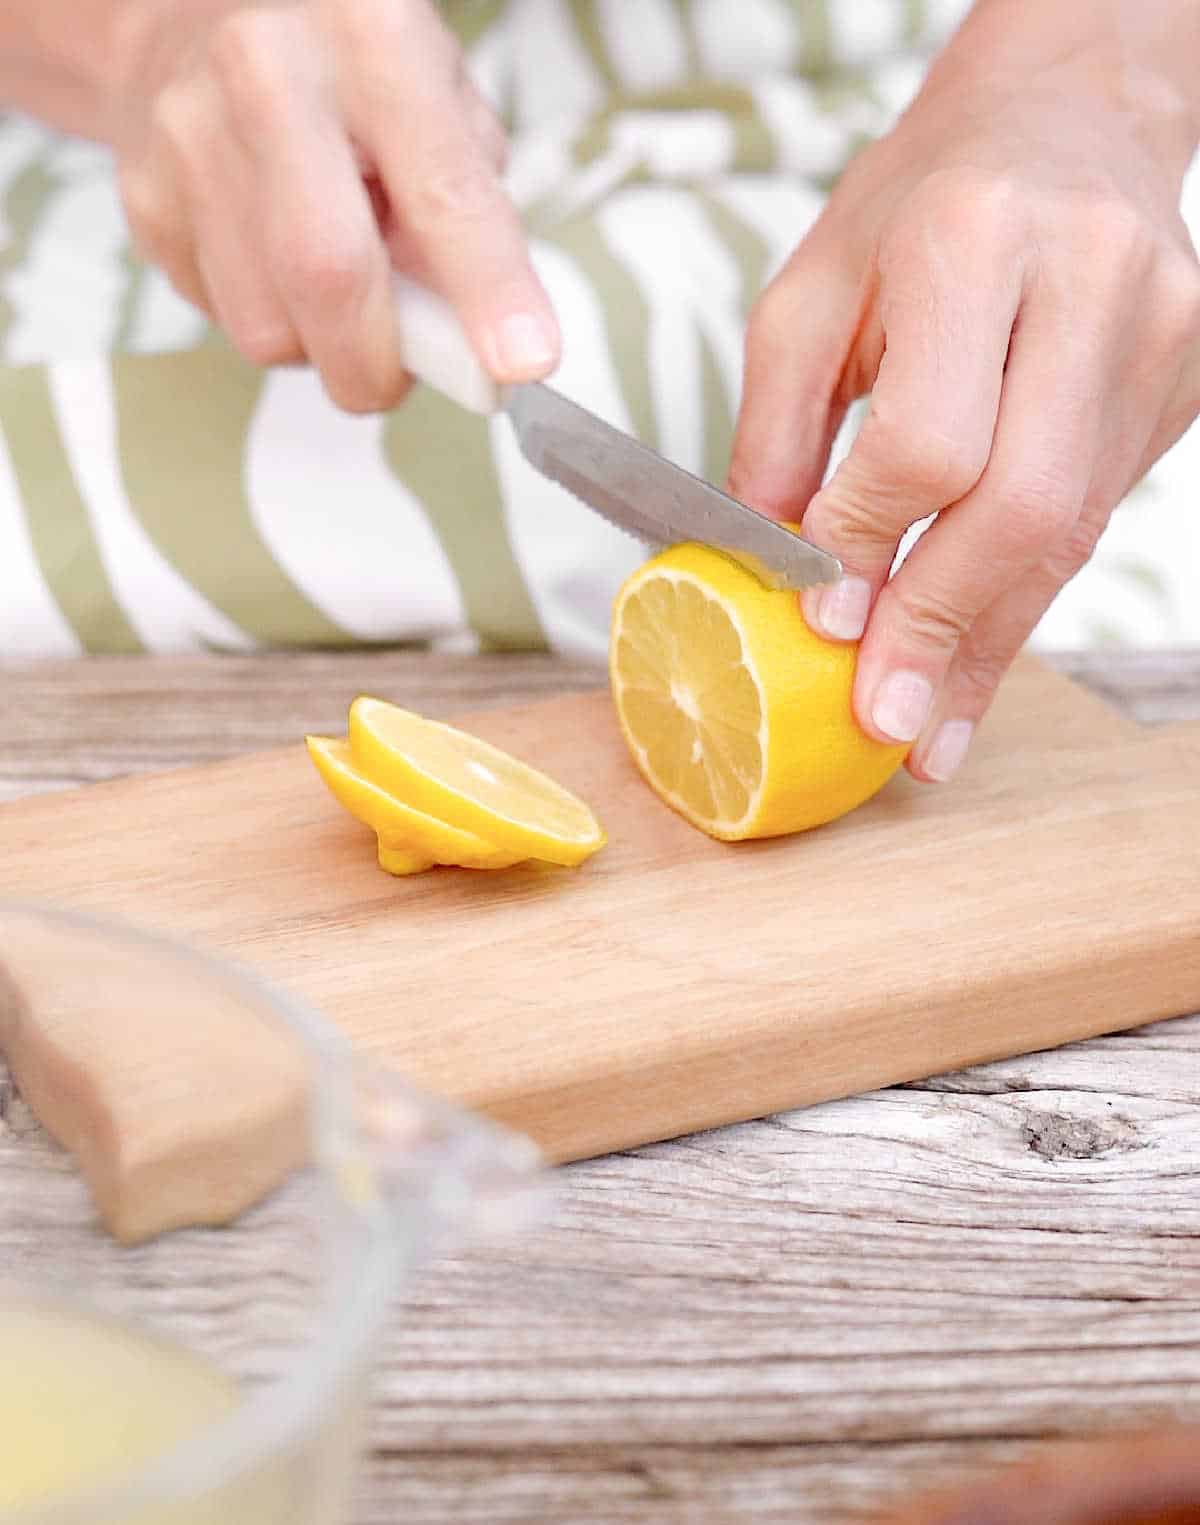 Person with green and white dress cutting lemon slices on a light colored wooden board.